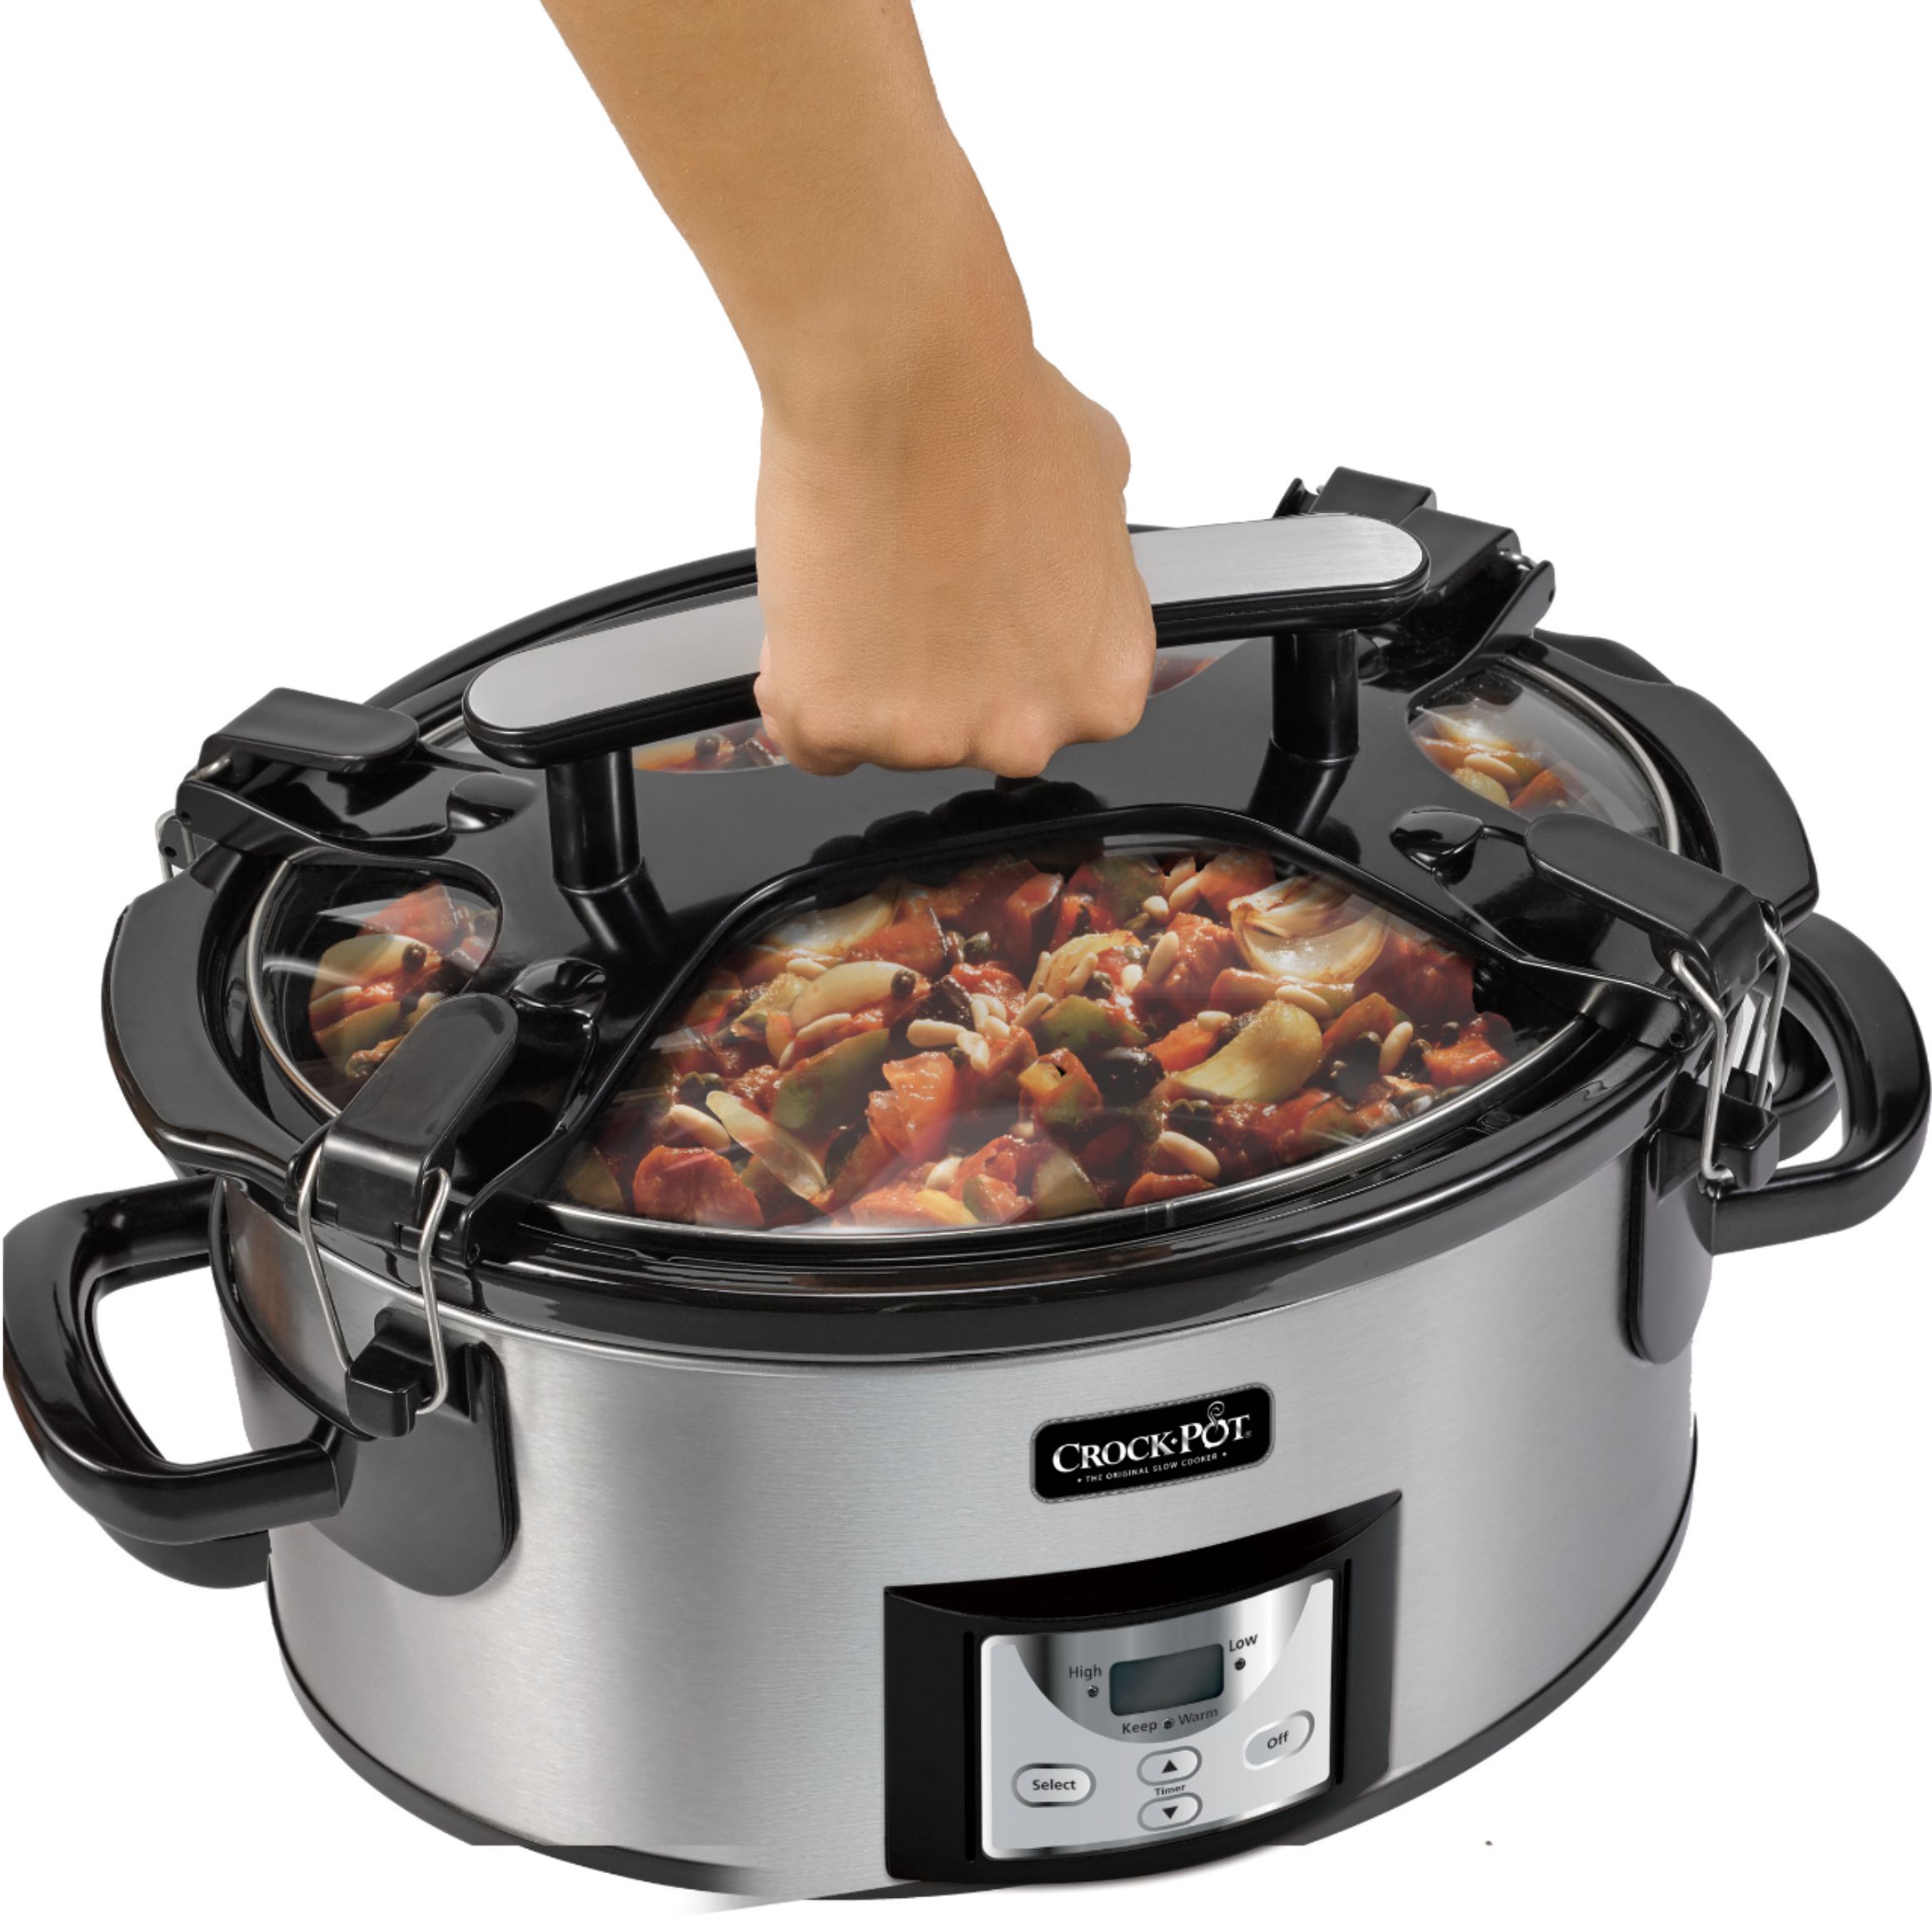 Crockpot Portable 6 Quart Slow Cooker with Locking Lid and Digital Timer